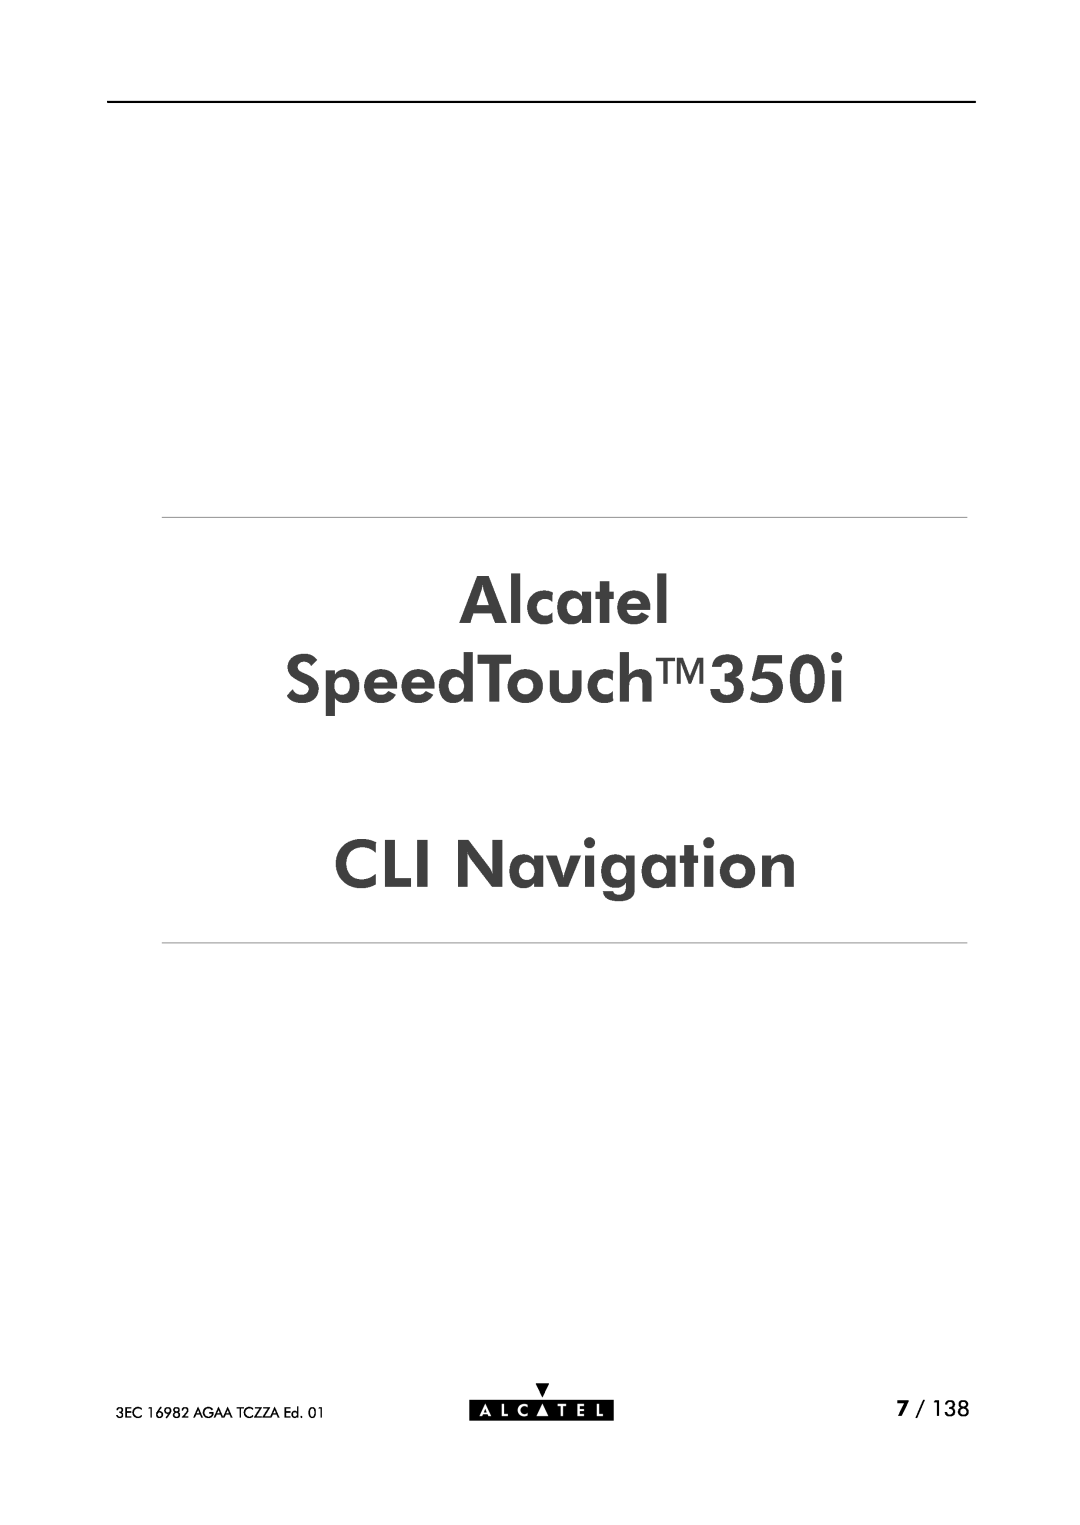 Alcatel Carrier Internetworking Solutions 350I manual Alcatel SpeedTouch CLI Navigation, 3EC 16982 AGAA TCZZA Ed 